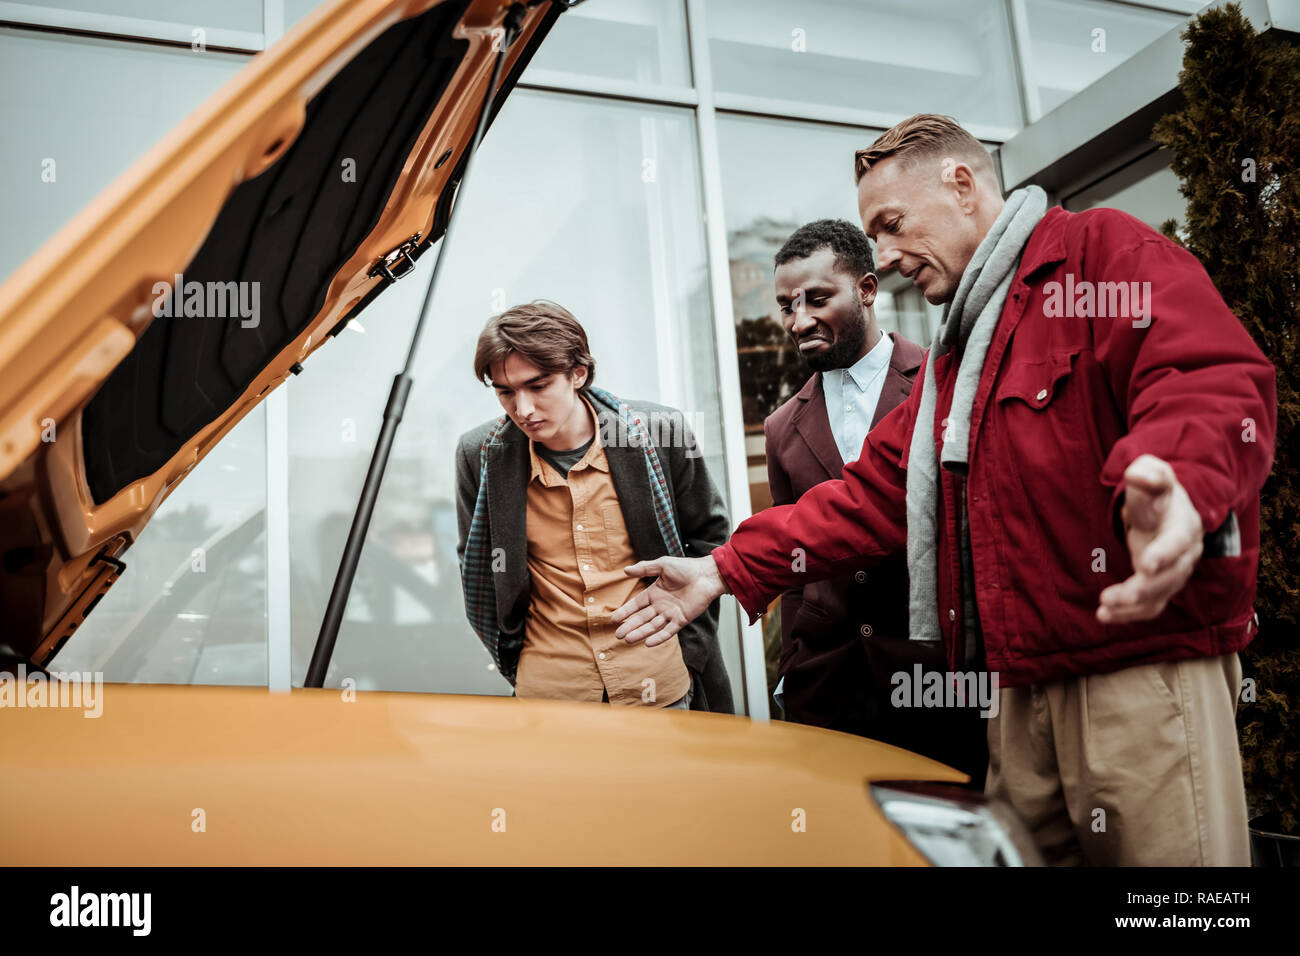 Young dark-haired son feeling excited before driving his first car Stock Photo